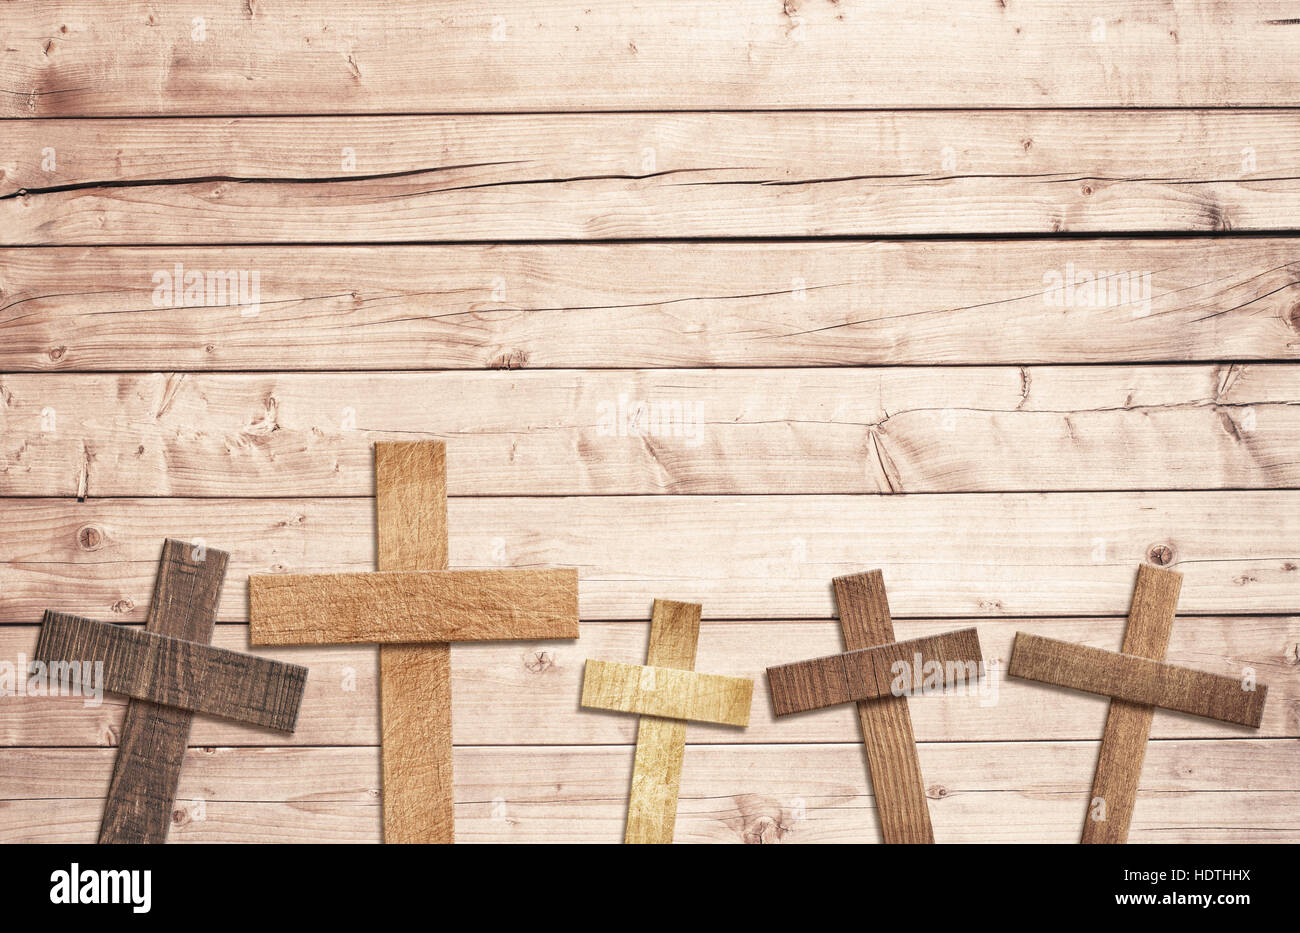 Wooden cross on brown old tabletop or wall surface Stock Photo